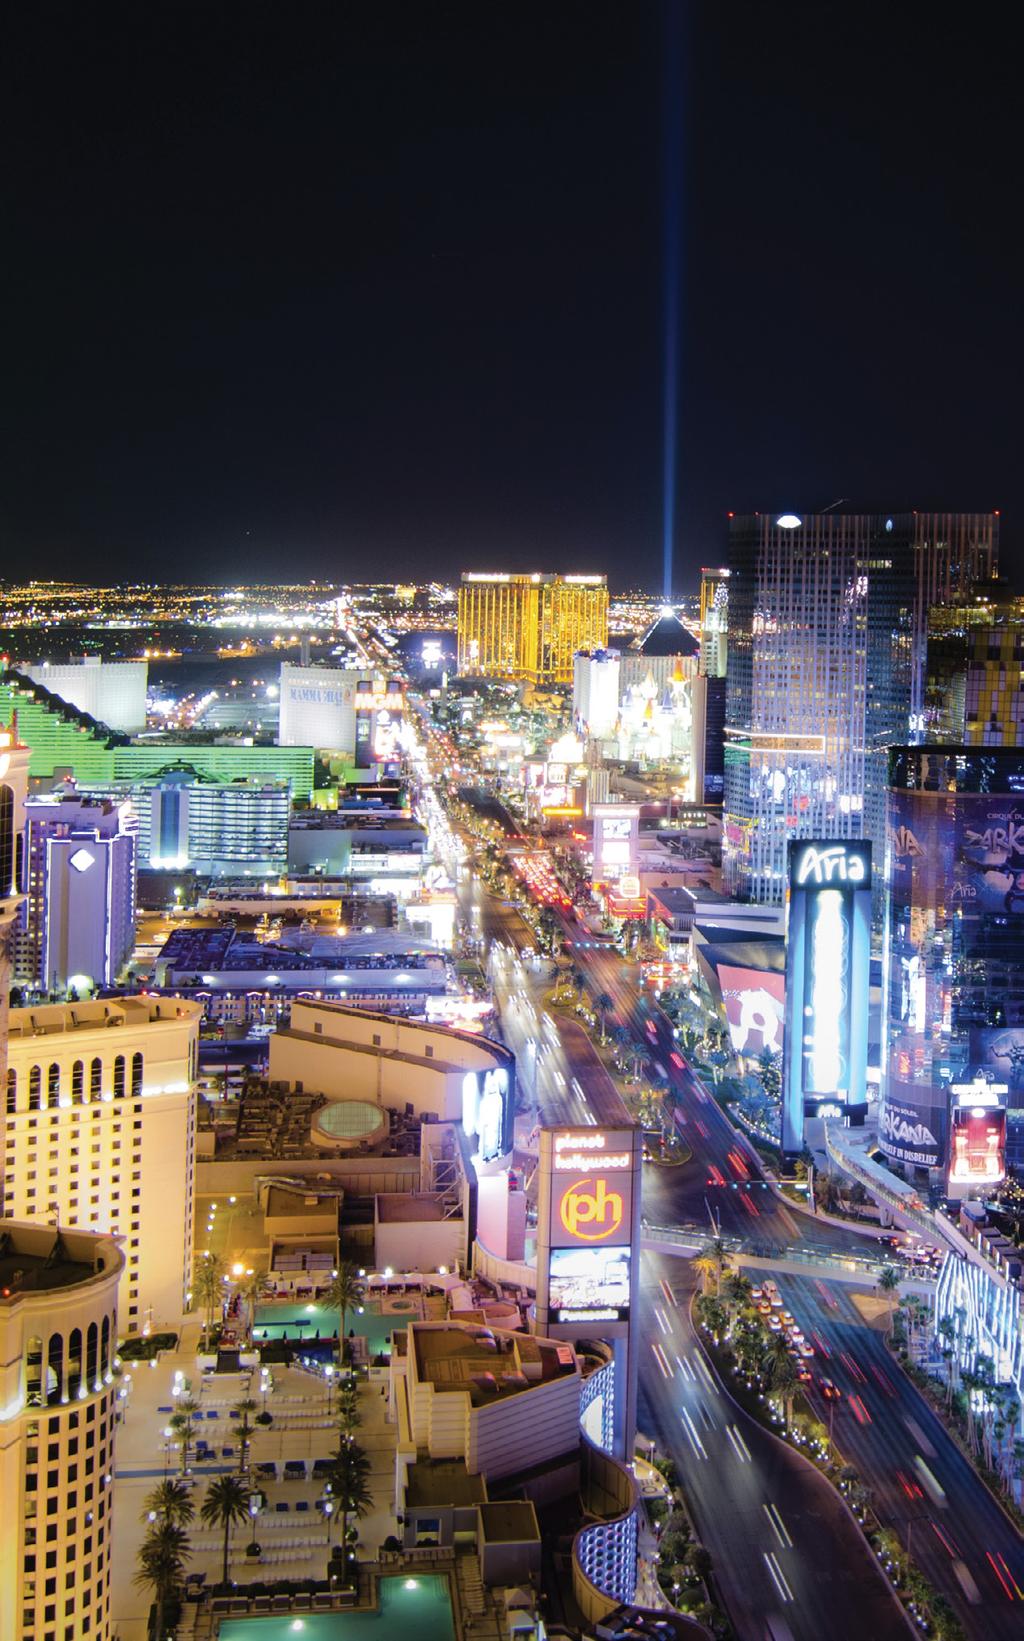 LAS VEGAS The ultimate destination for business and fun Attend NAB Show and visit the